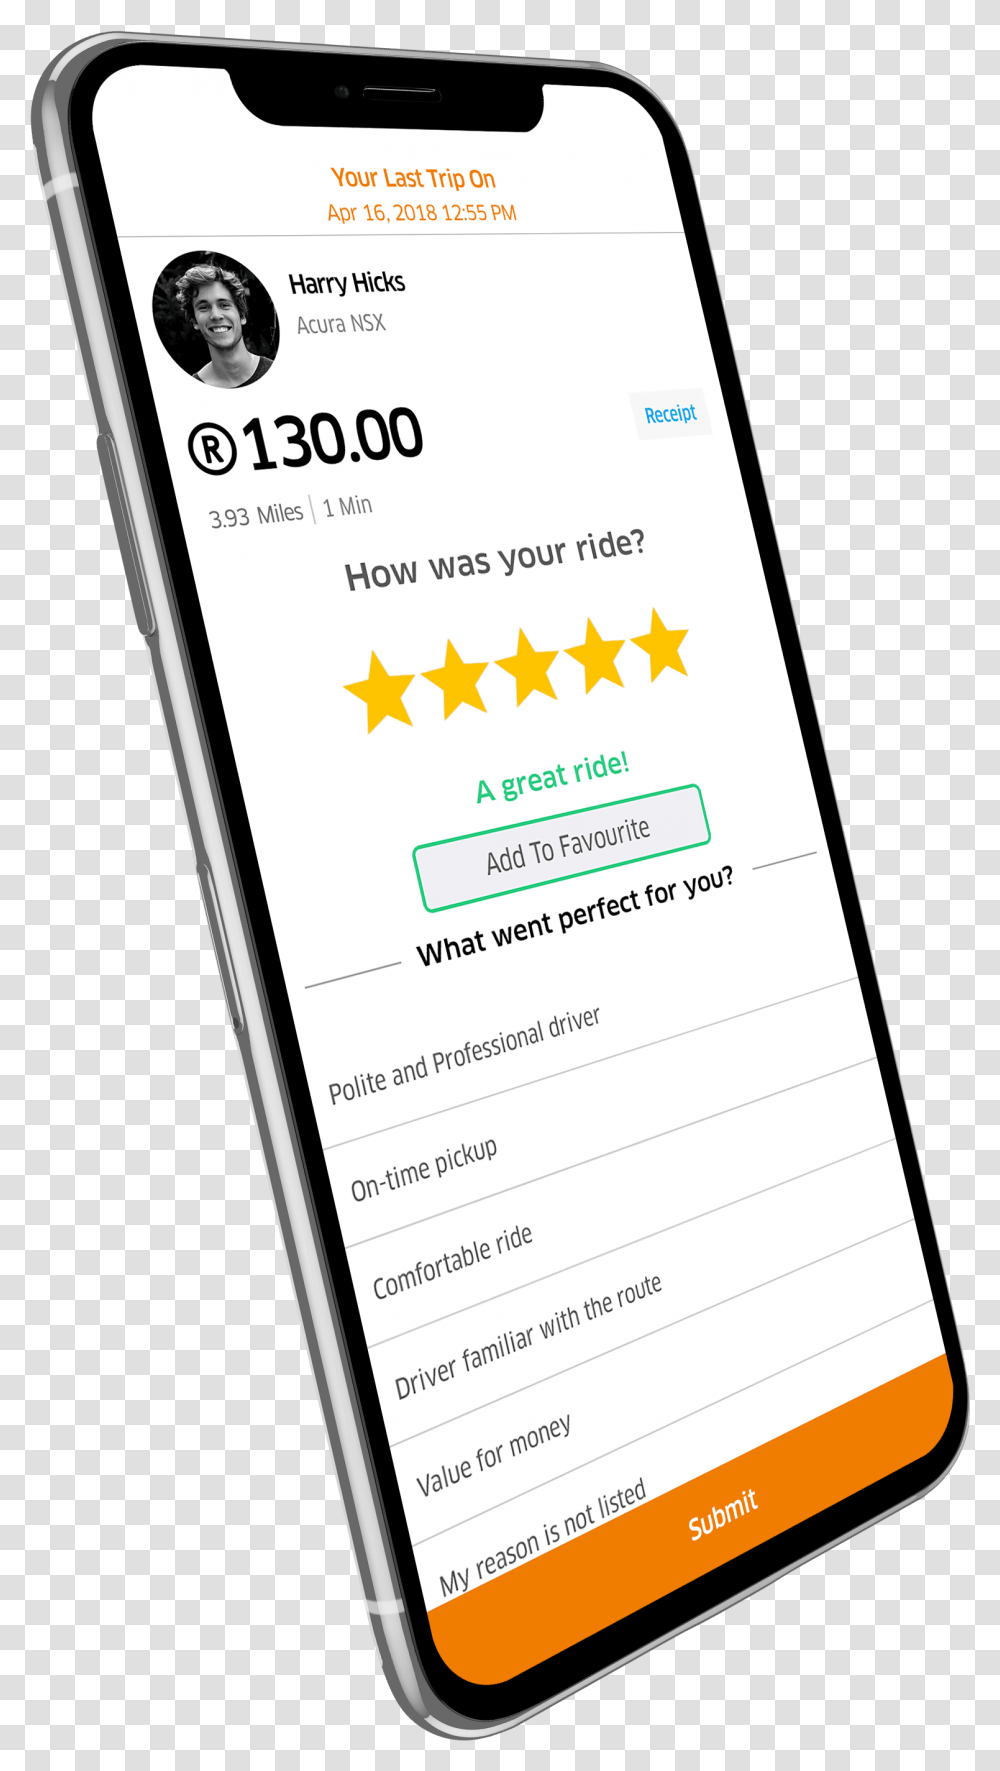 You Can Also Provide This Rating At The Bottom Of Your Smartphone, Mobile Phone, Electronics, Cell Phone Transparent Png